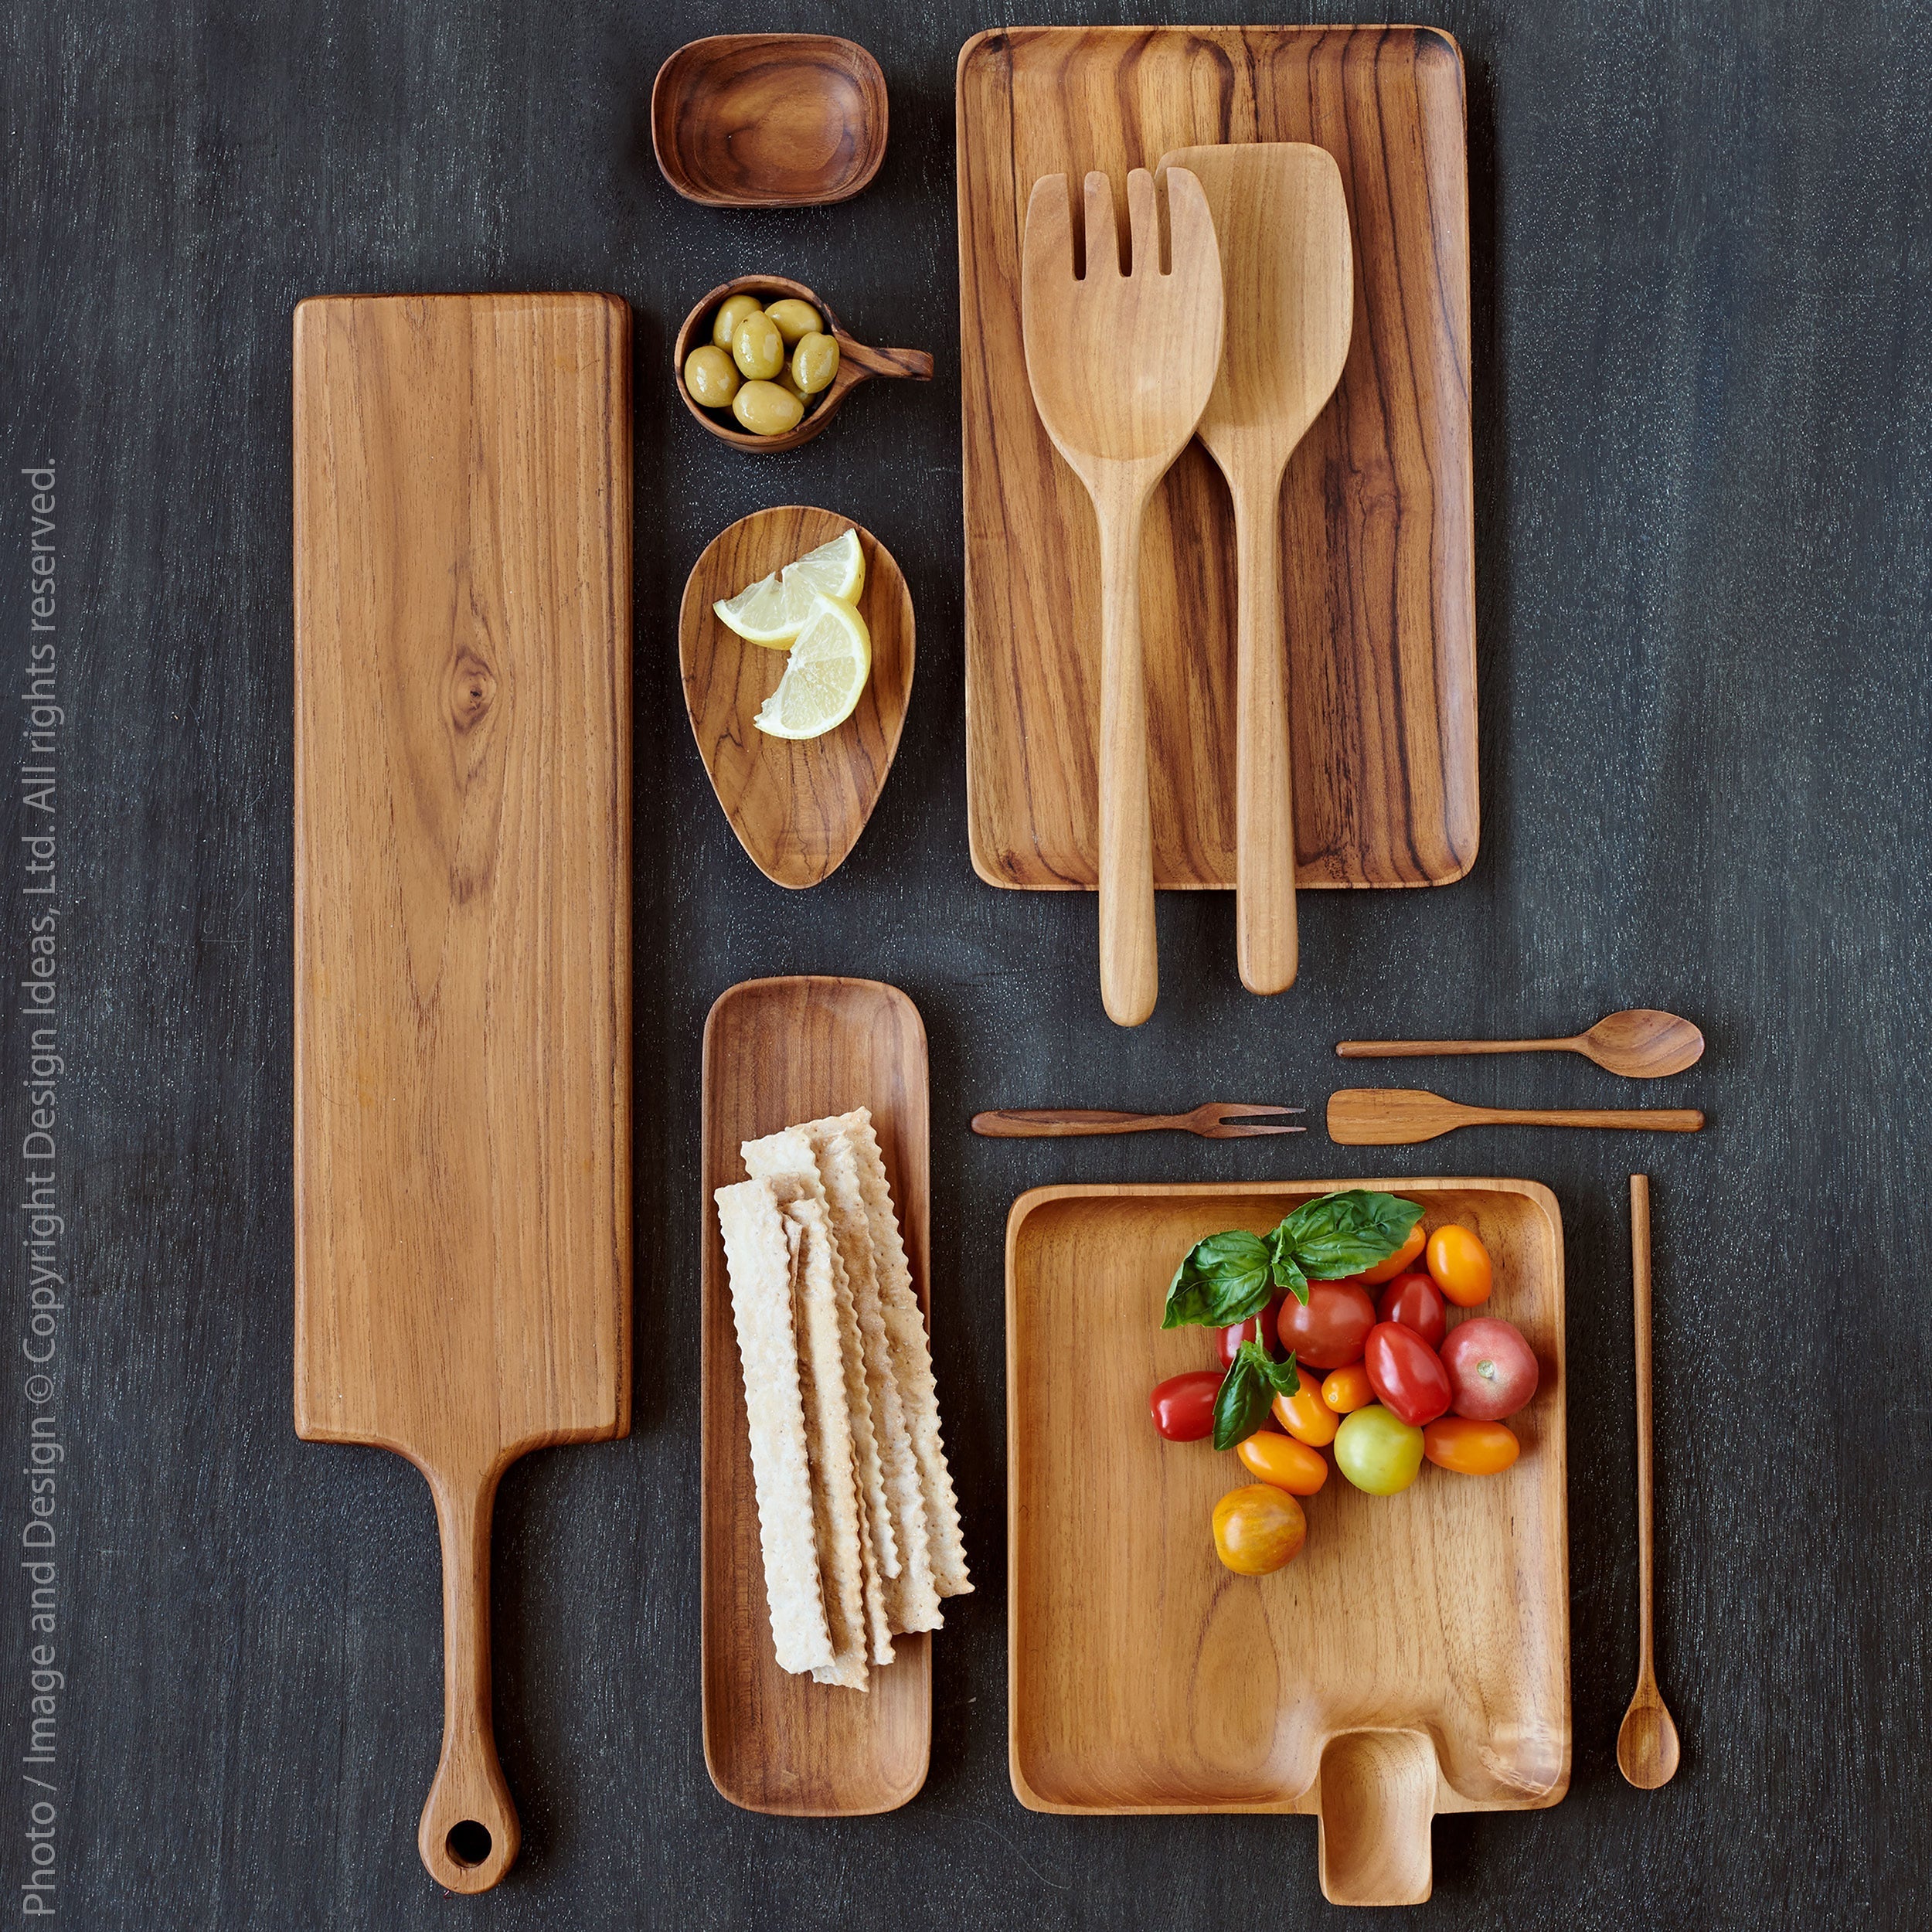 Chiku Teak Spreader Black Color | Image 2 | From the Chiku Collection | Expertly handmade with natural teak for long lasting use | These utensils are sustainably sourced | Available in natural color | texxture home